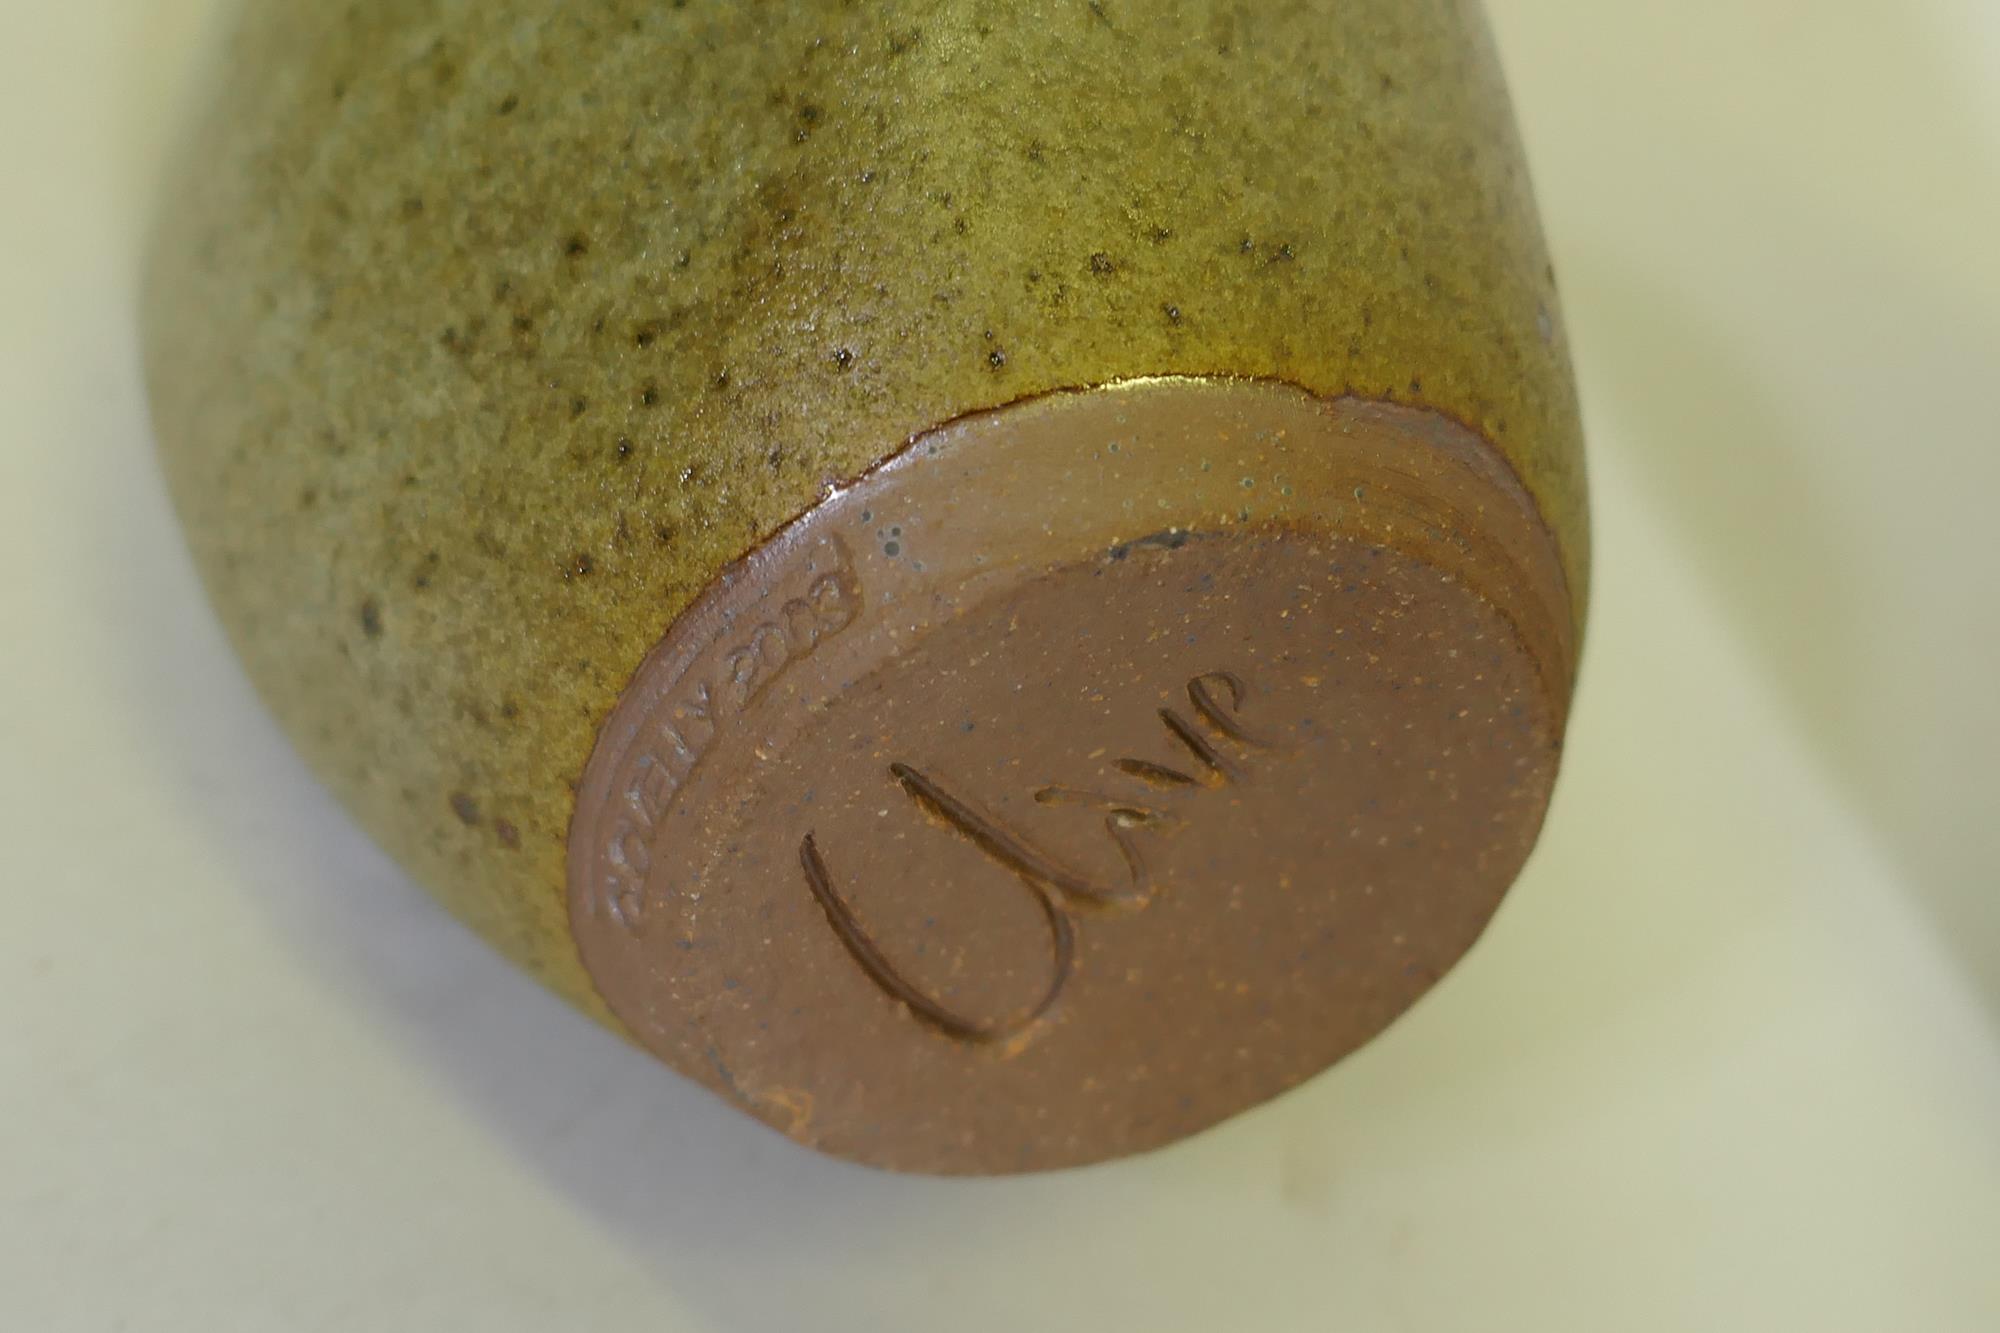 Clive Pearson for Clovelly Pottery, vase, 17cm high, a Bristol Pottery vase, a Lamorna Pottery vase, - Image 7 of 9